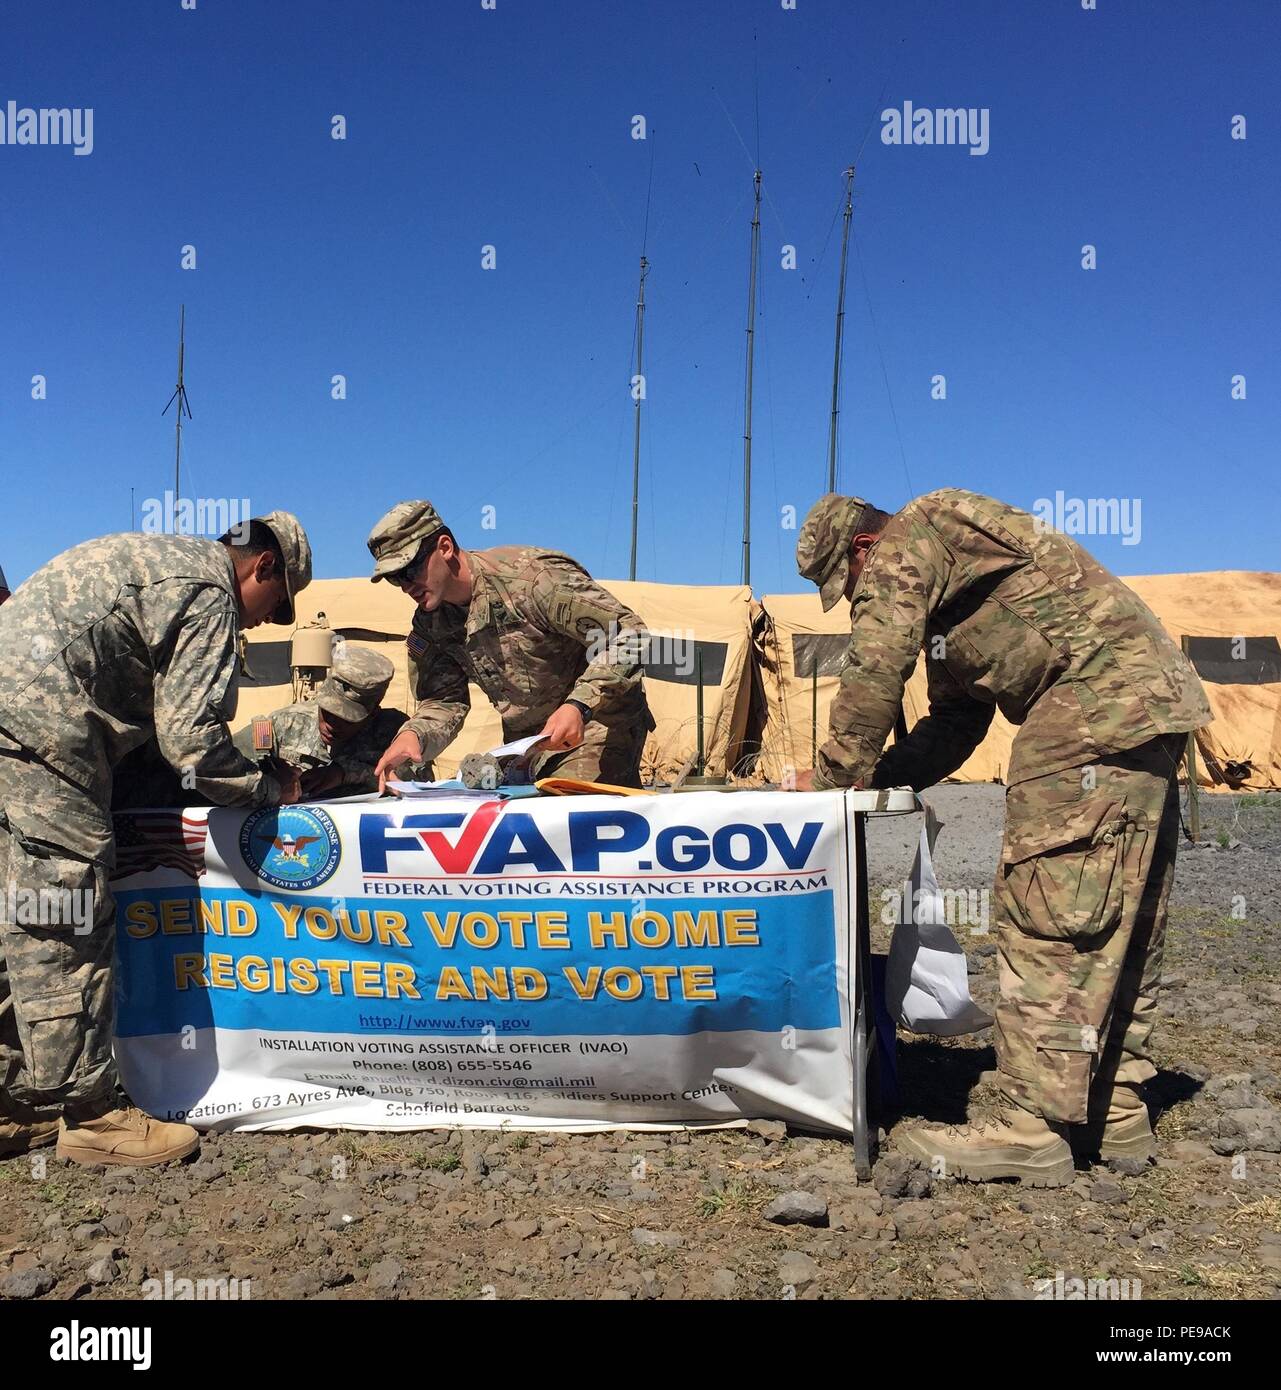 Voting Assistance Officer 1st Lt. Chase Cappo (middle back), assigned to 2nd Squadron 14th Cavalry Regiment, 2nd Brigade Combat Team, 25th Infantry Division, sets up a voter registration table with the FVAP banner at one of many training areas 2-14 CAV utilized at the Pohakuloa Training Area in Hawaii. (U.S. Army photo by 1st Lt. Edward Dieppa, Troop C, 2nd Squadron 14th Cavalry Regiment, 2nd Brigade Combat Team, 25th Infantry Division) Stock Photo